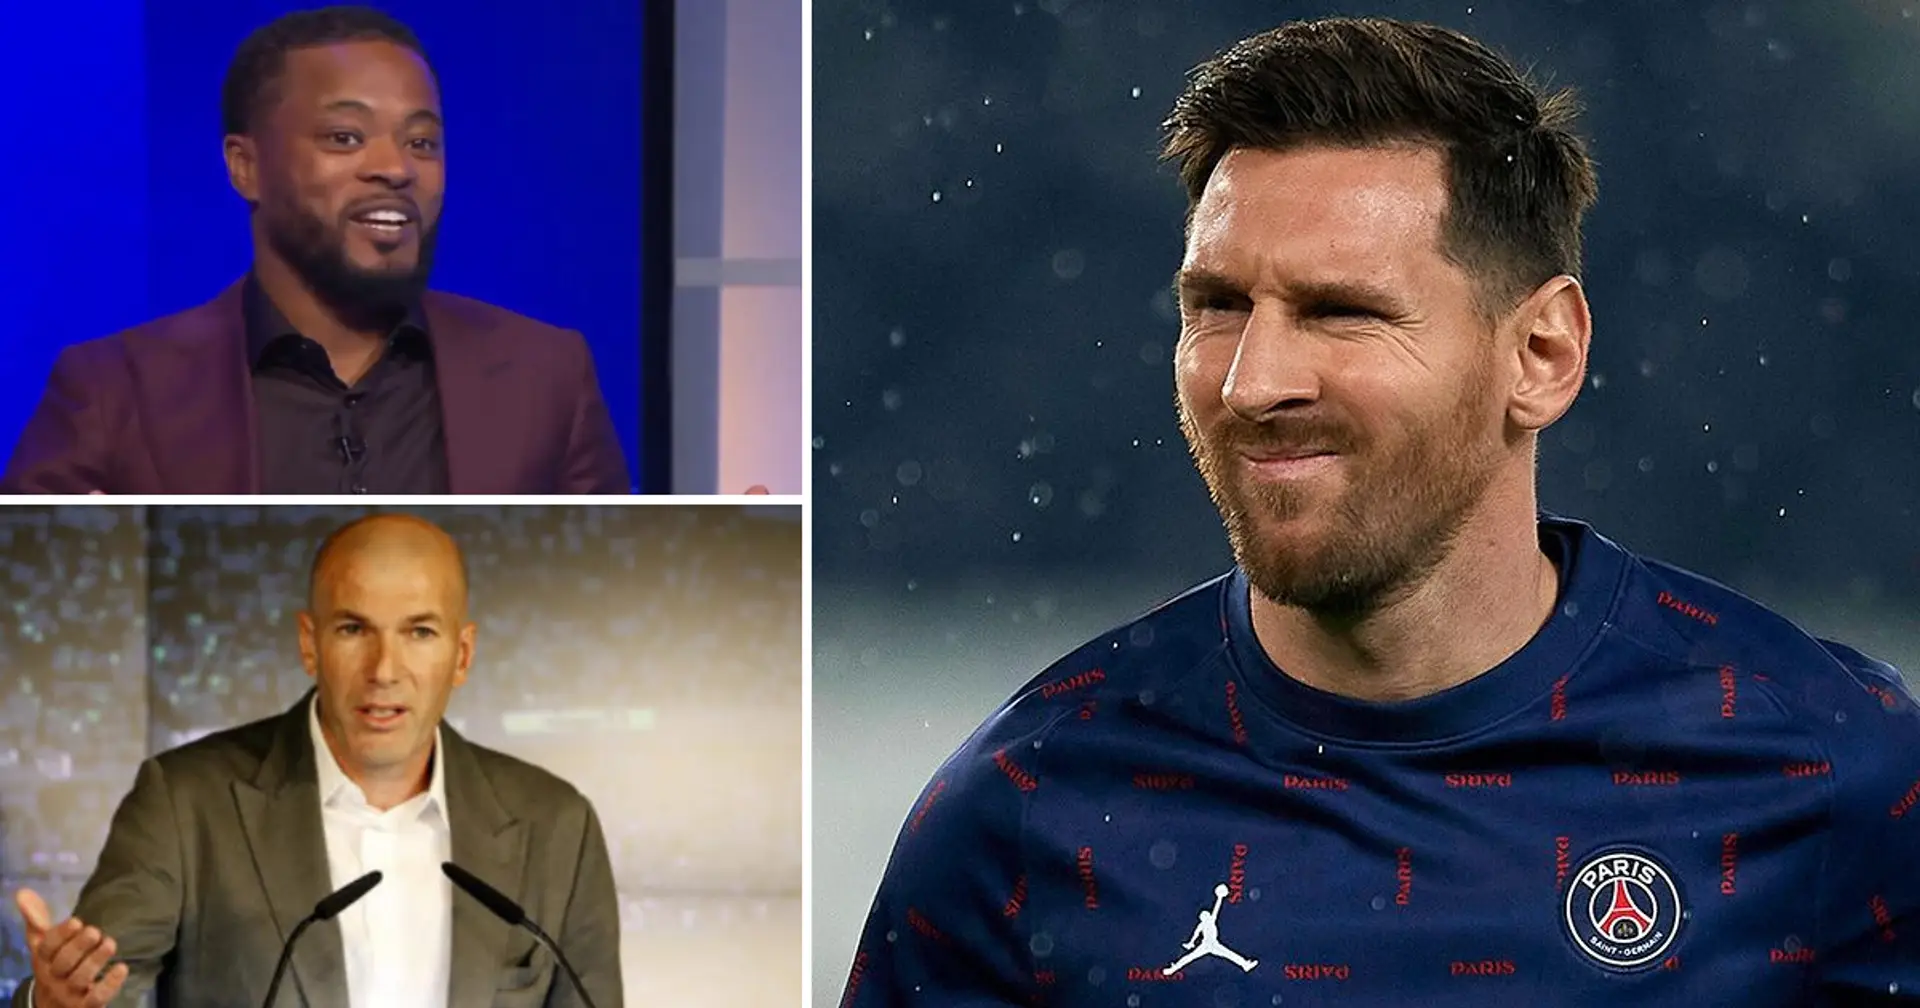 'He punched a player' and 3 most ridiculous claims against Messi's Ballon d'Or bid we've heard so far